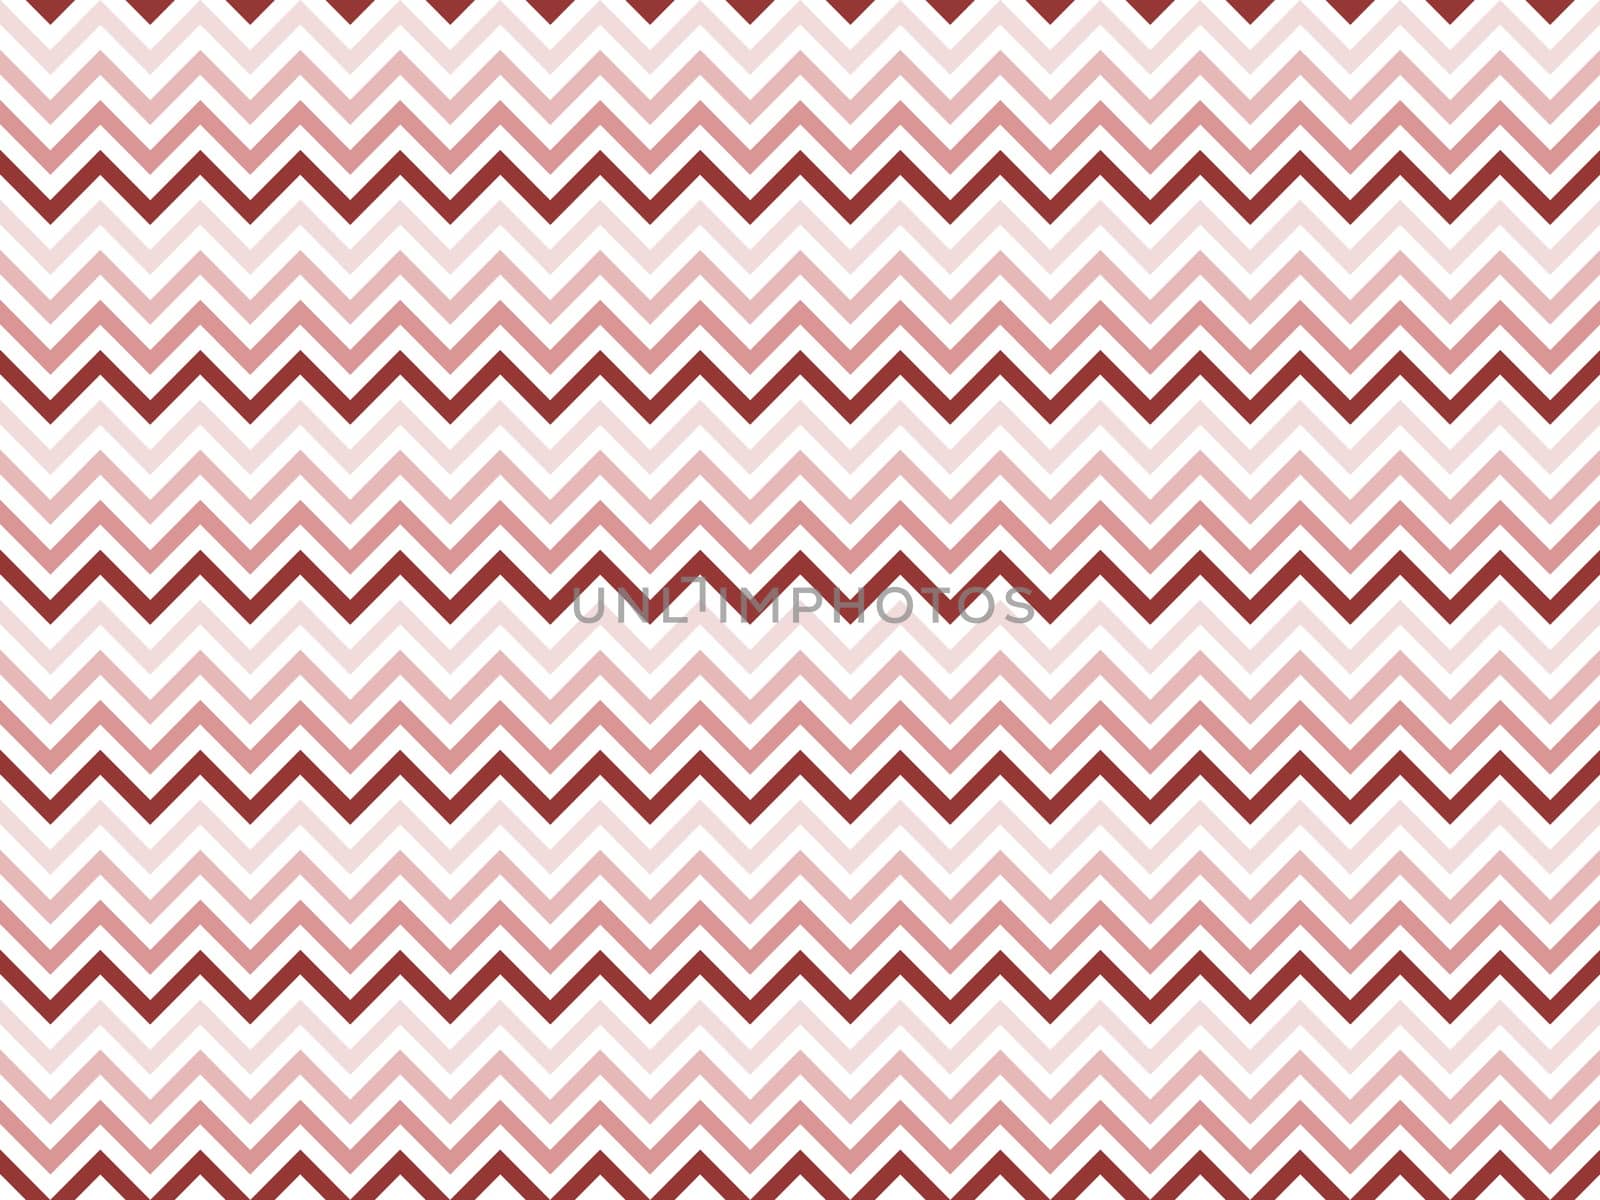 Seamless zigzag pattern with different red colors in white background